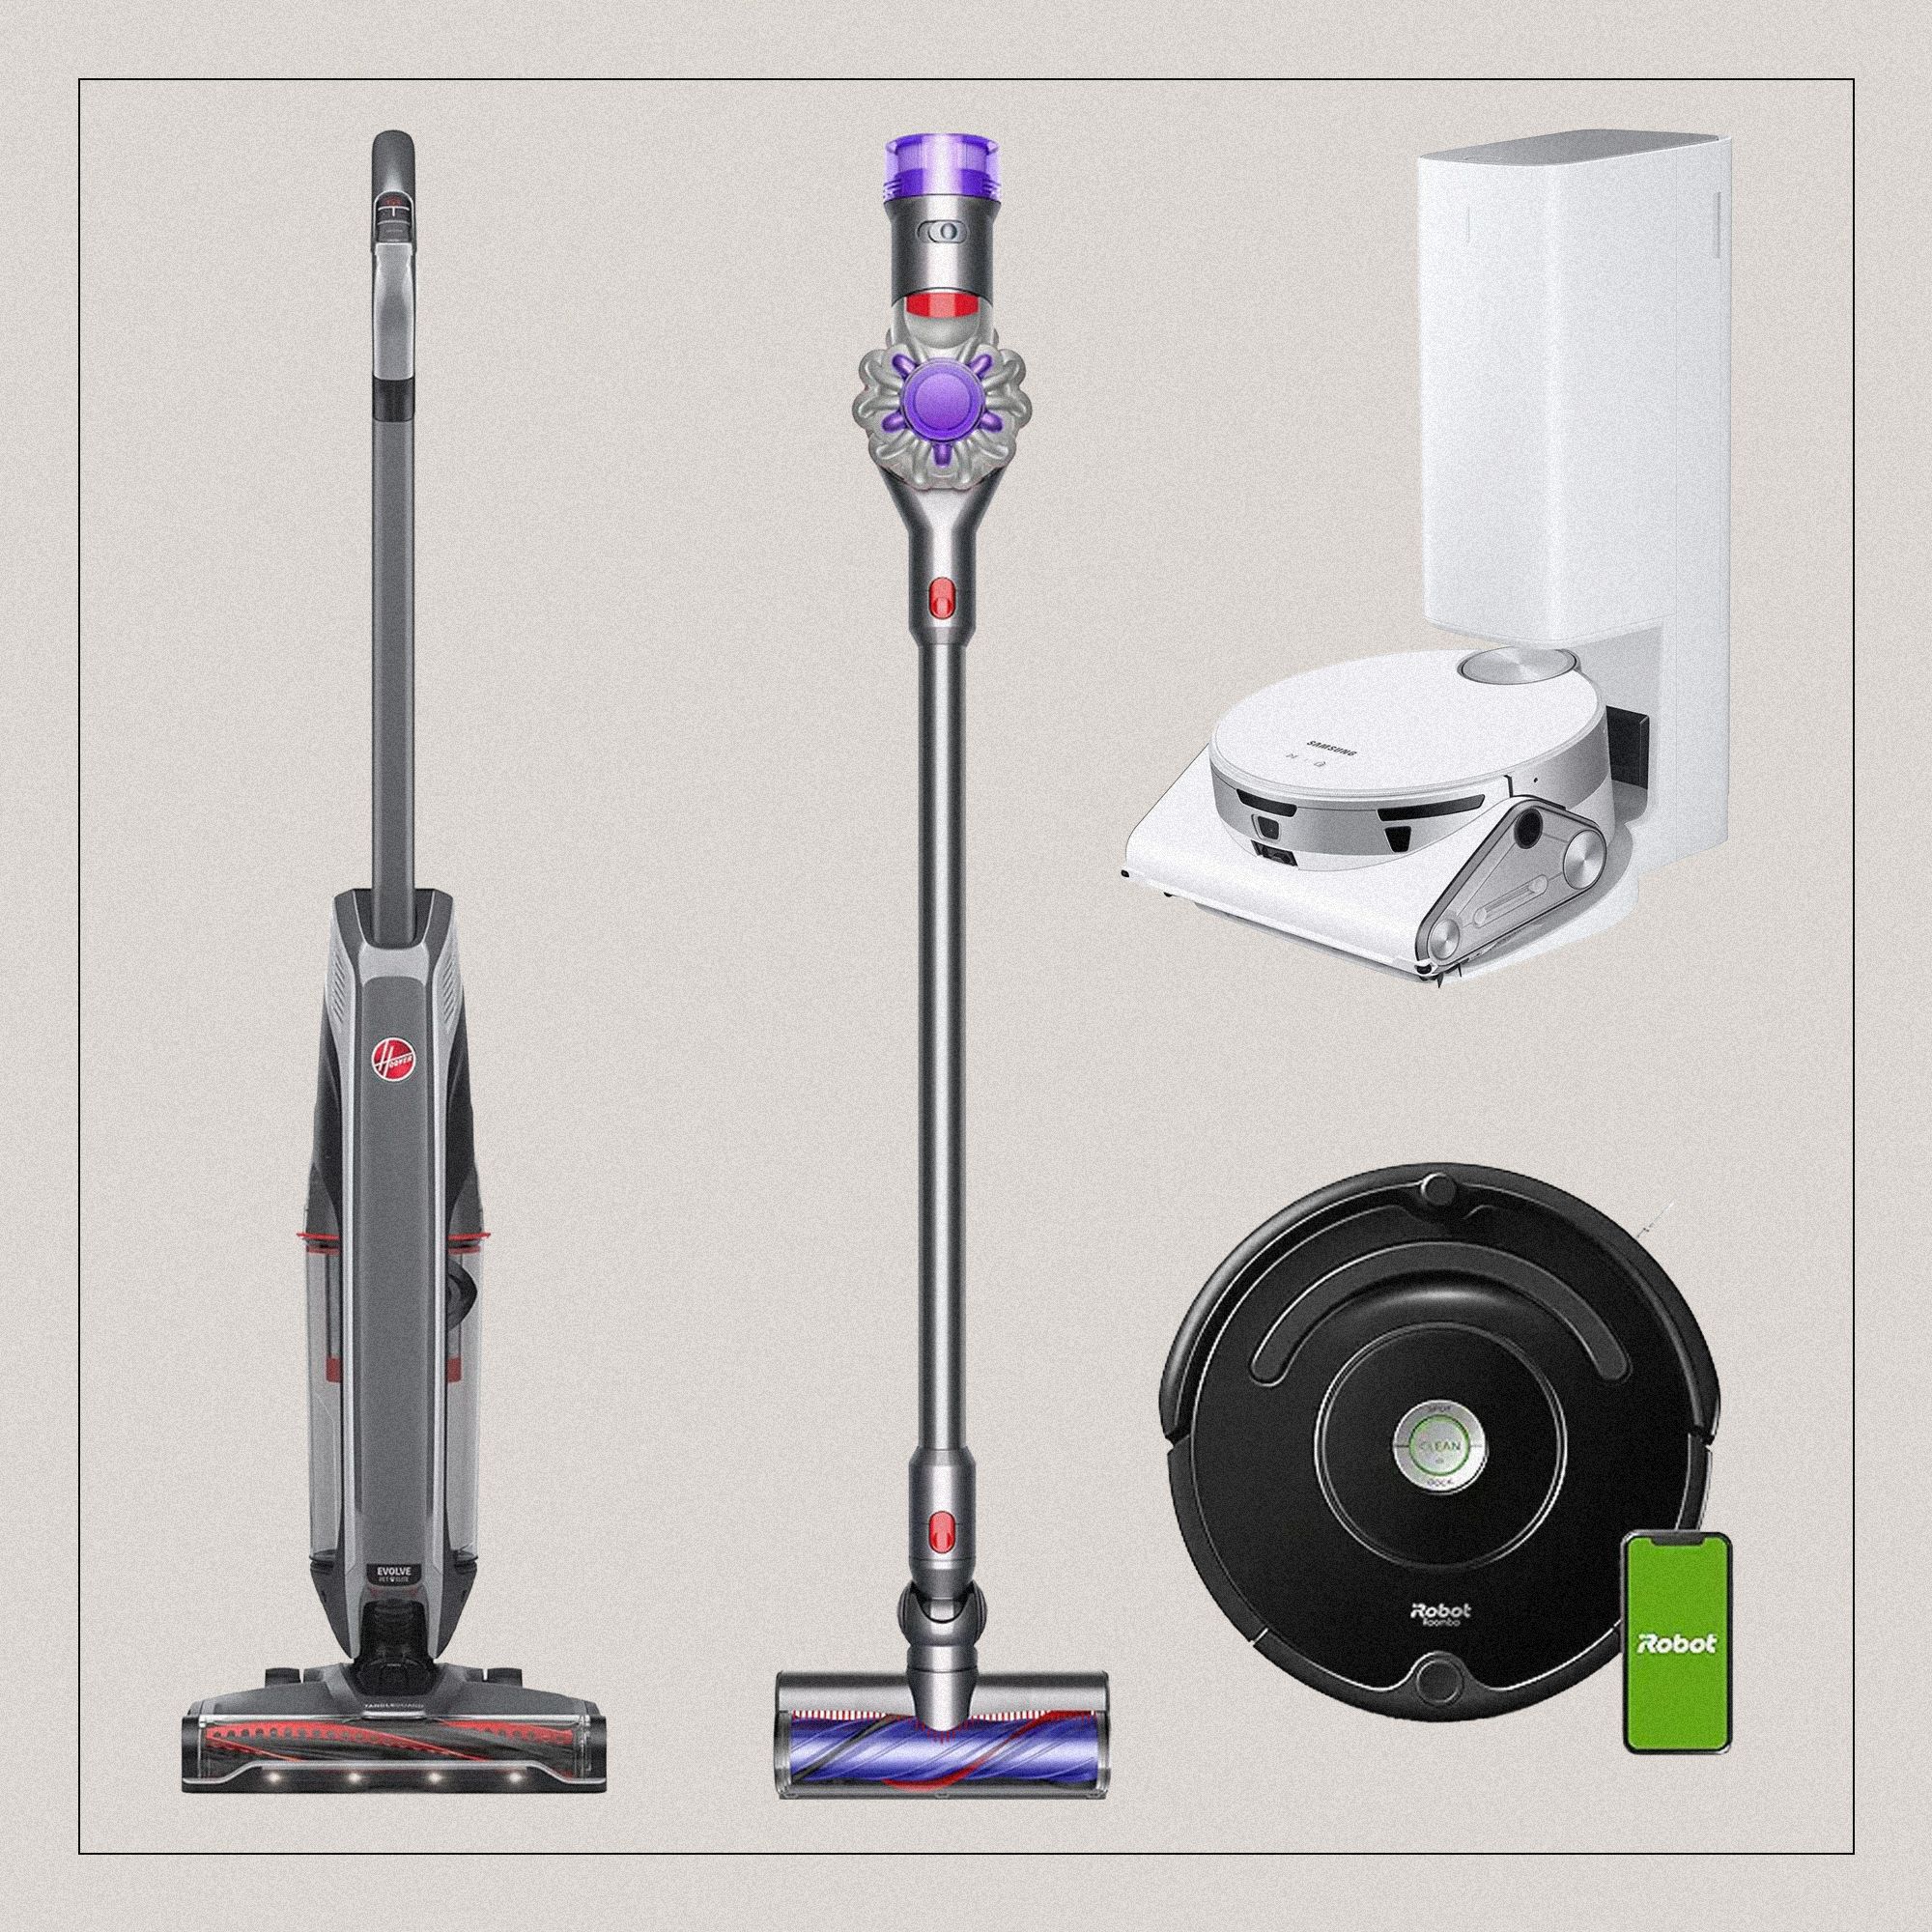 Youll Want to Add These Prime Day Vacuum Deals to Your Cart Right Now